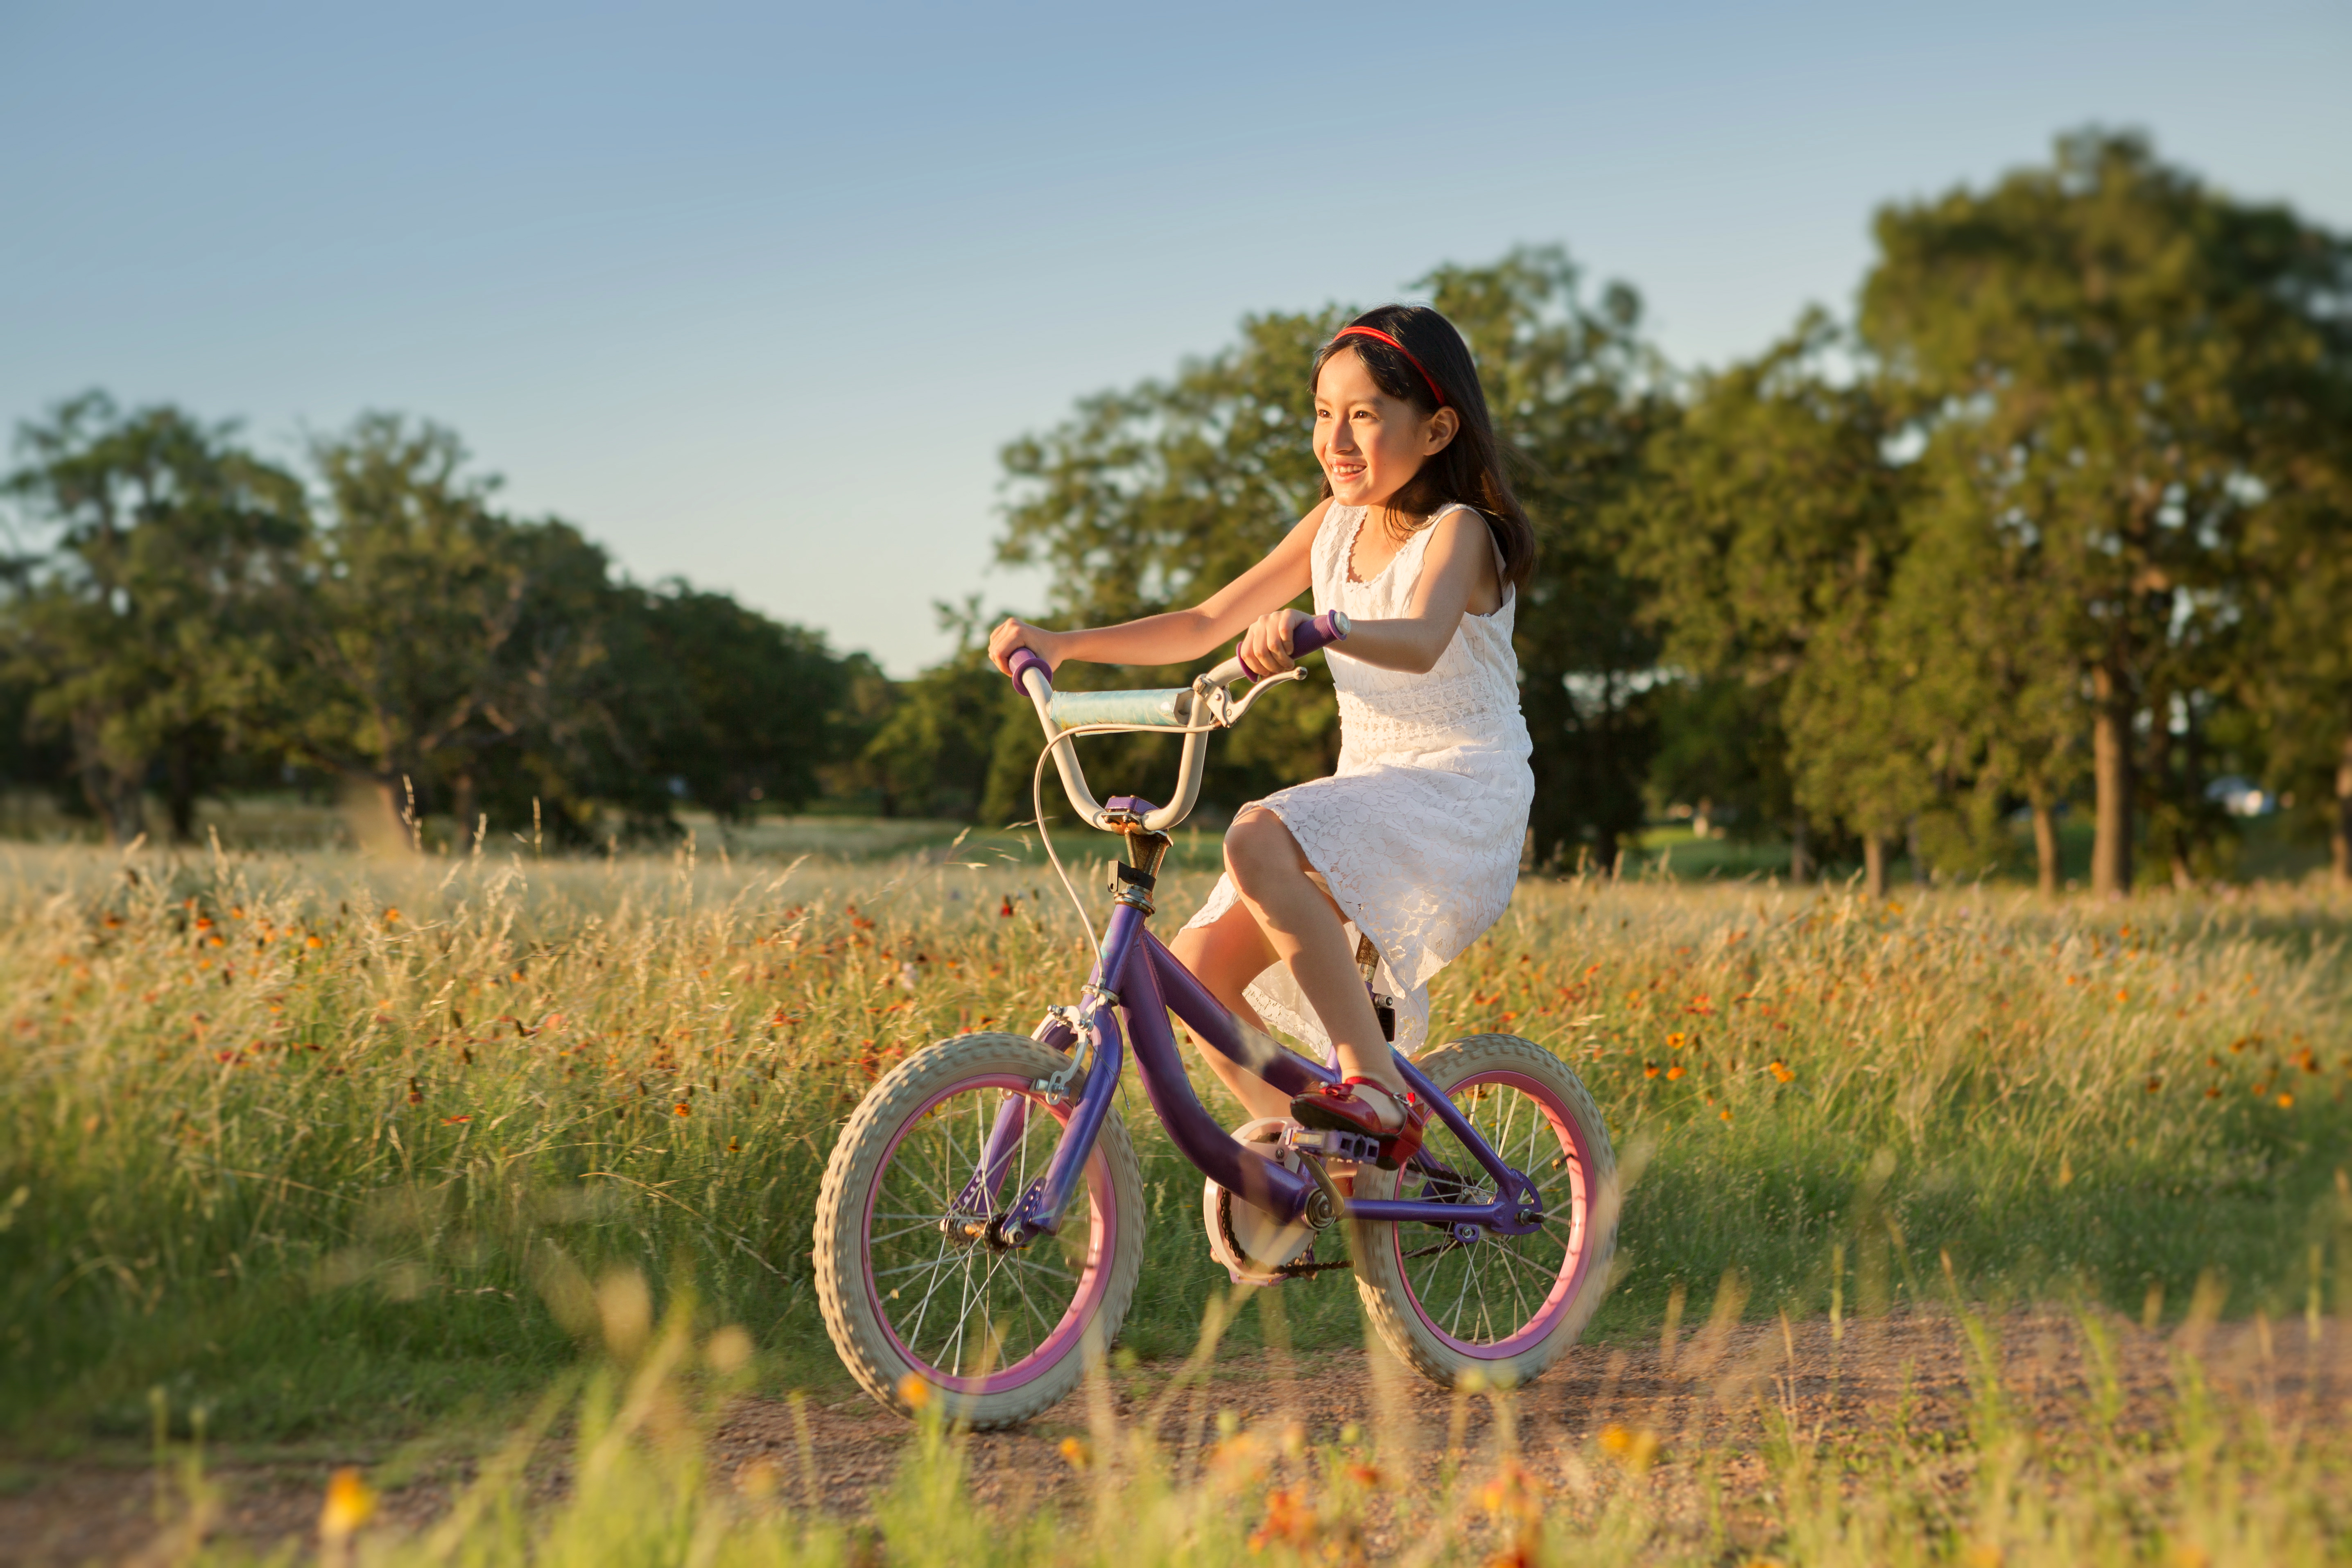 Smiling girl with light brown skin on a pink bike riding in a field.